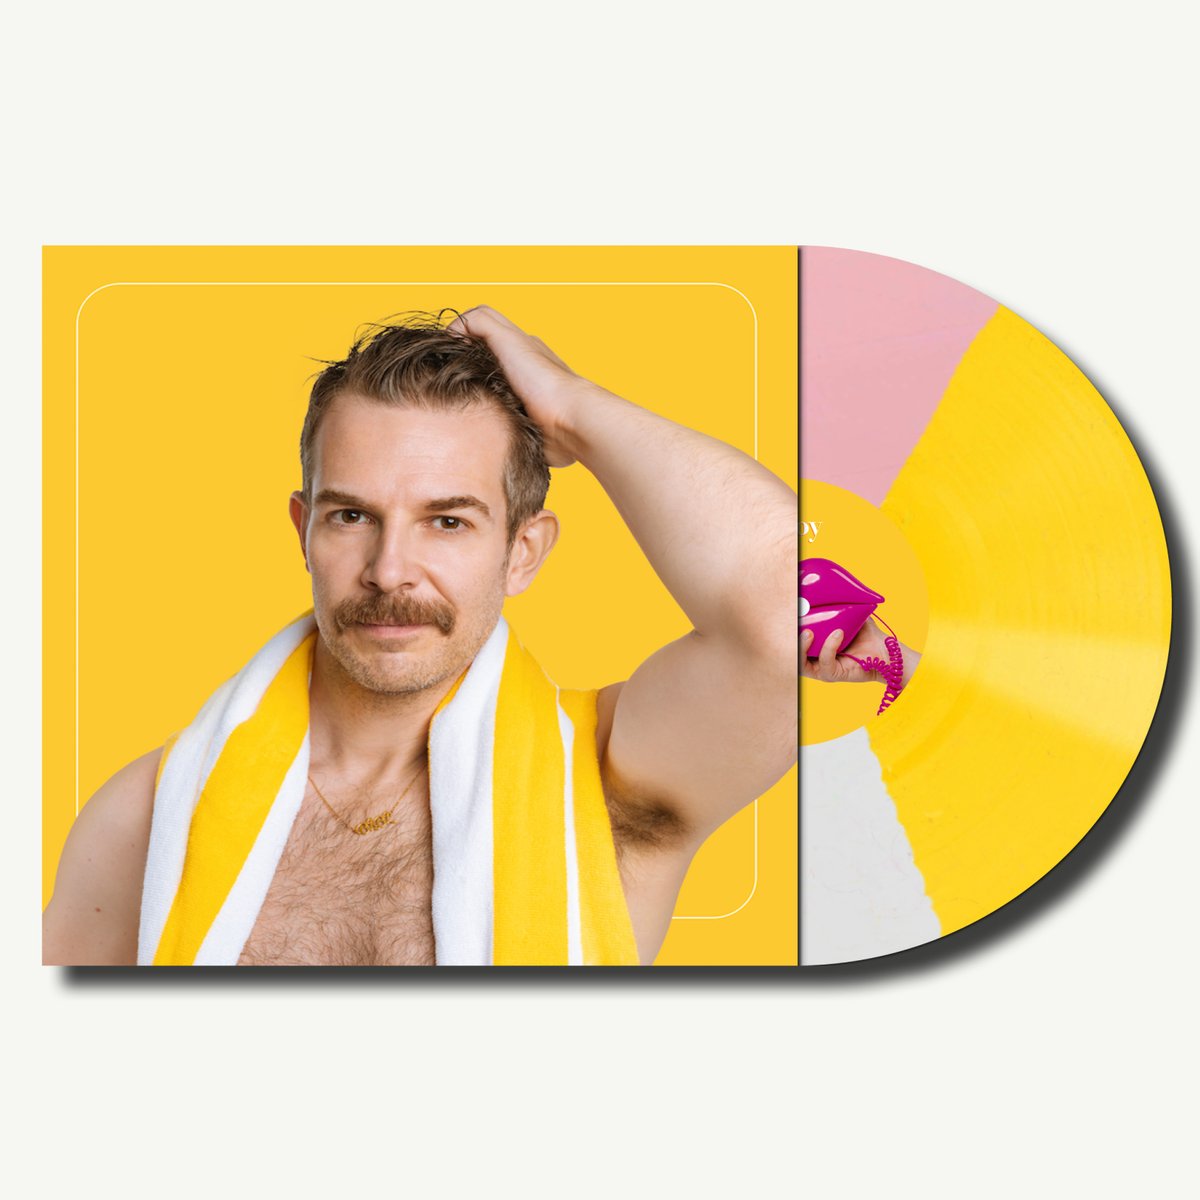 NEW DROP! Enjoy Youth, the follow up to @brightlightx2 #1 UK Dance Album Fun City, comes exclusively pressed to pink, white and yellow tri-colour LP, limited to 350 copies and hand-numbered to order: blood-records.co.uk/products/BL